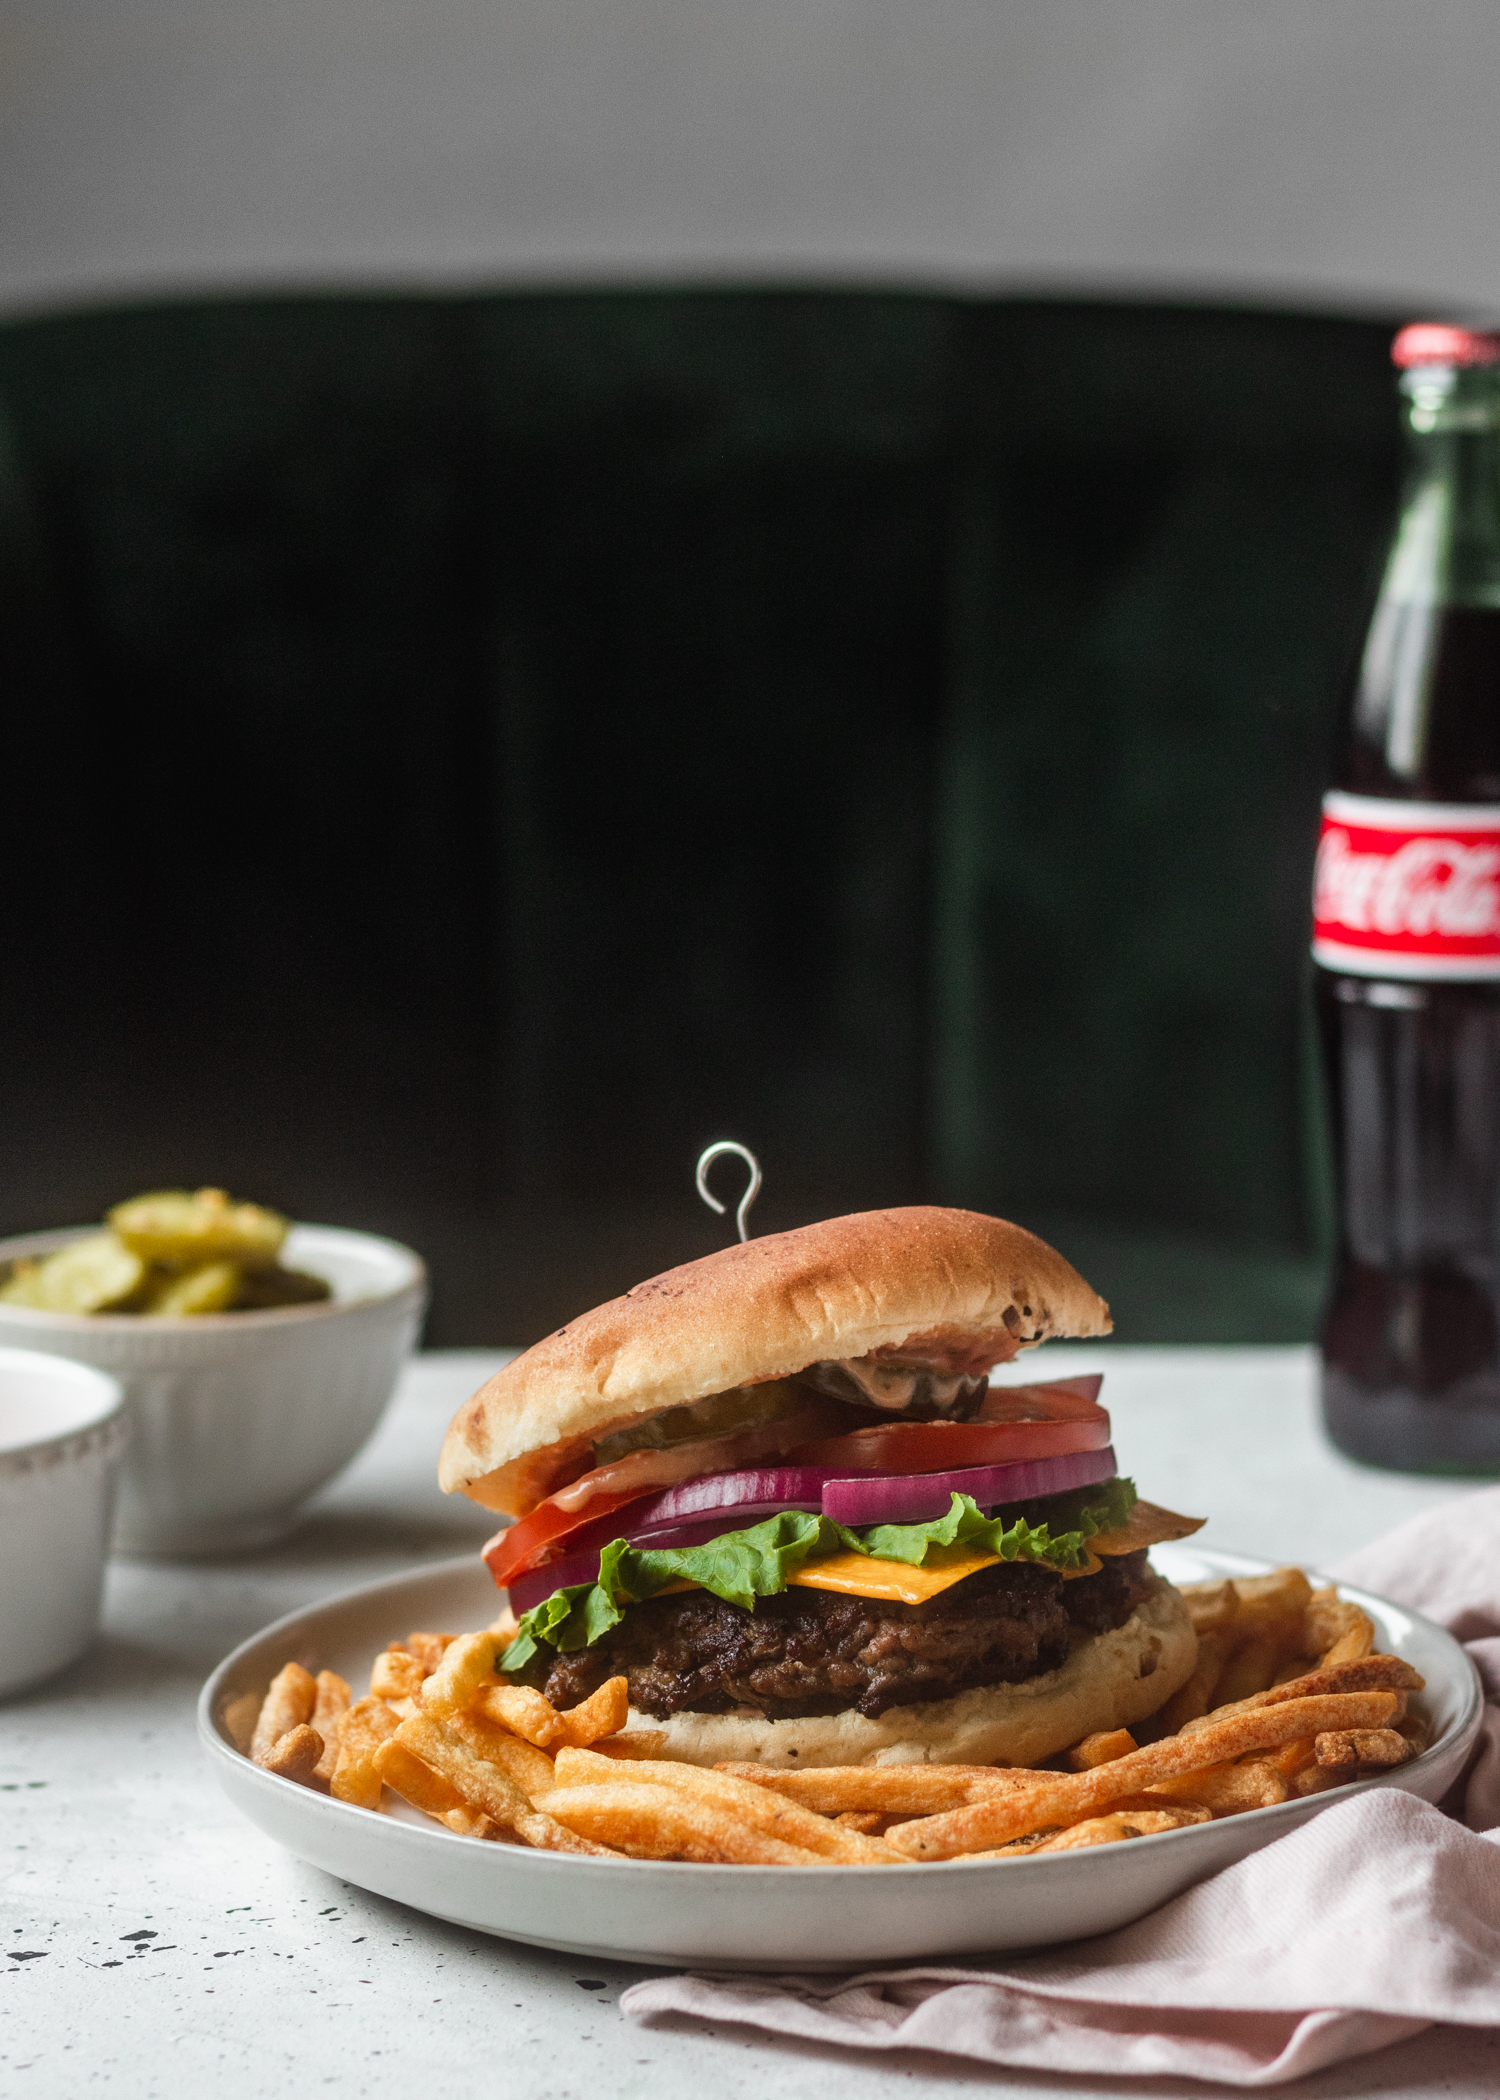 A close-up of a cheeseburger on a white plate with fries, sitting on a grey table next to a bottle of Coke, a pink linen, and a bowl of pickles with a green velvet booth in the background.